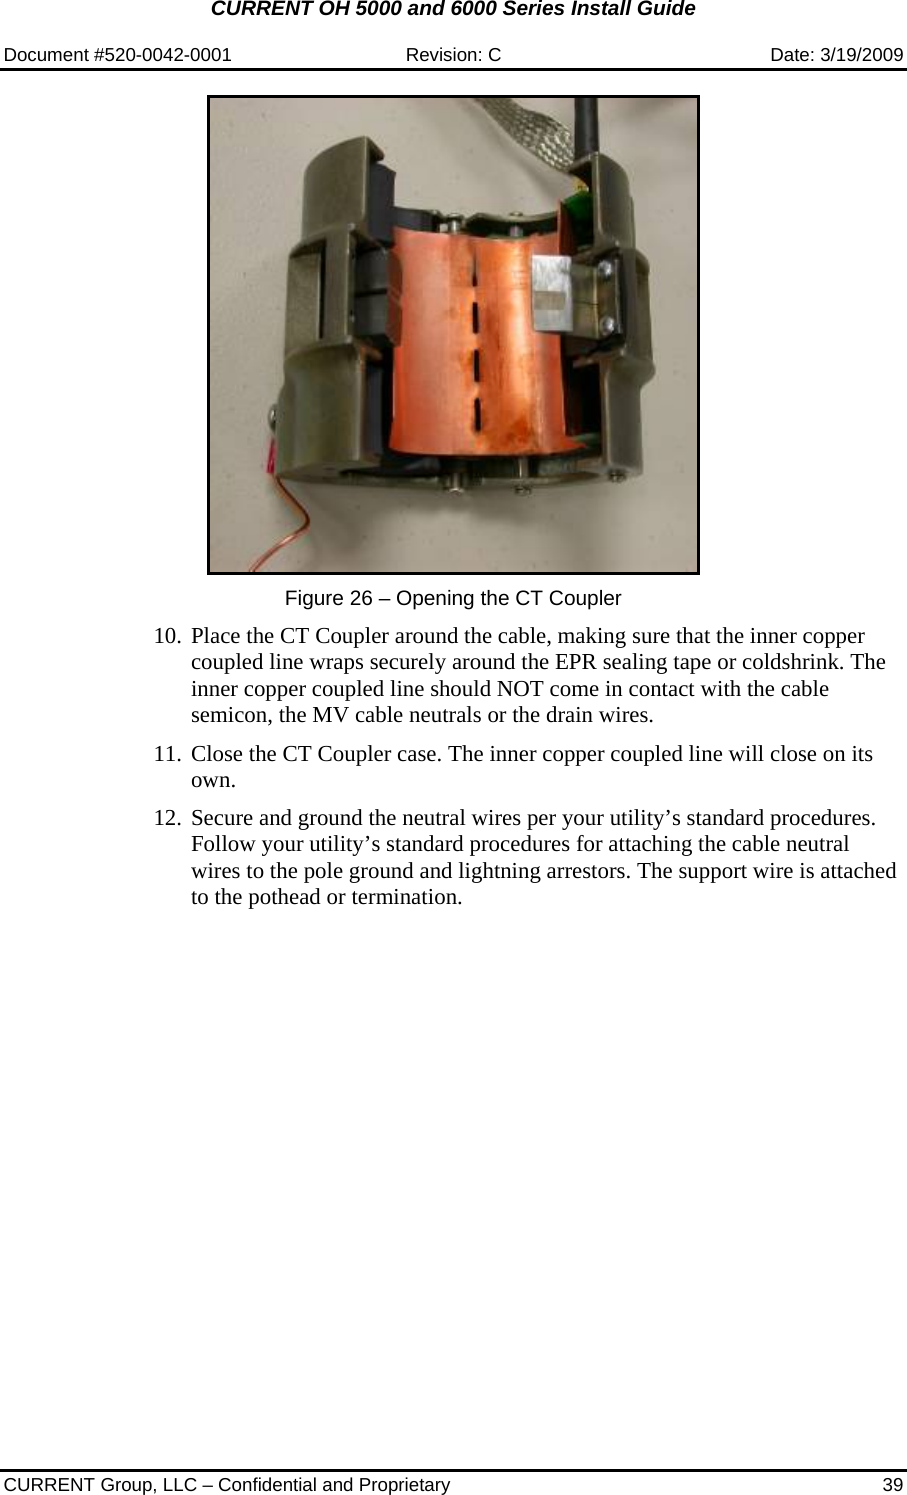 CURRENT OH 5000 and 6000 Series Install Guide  Document #520-0042-0001  Revision: C  Date: 3/19/2009  CURRENT Group, LLC – Confidential and Proprietary  39   Figure 26 – Opening the CT Coupler  10. Place the CT Coupler around the cable, making sure that the inner copper coupled line wraps securely around the EPR sealing tape or coldshrink. The inner copper coupled line should NOT come in contact with the cable semicon, the MV cable neutrals or the drain wires.  11. Close the CT Coupler case. The inner copper coupled line will close on its own.  12. Secure and ground the neutral wires per your utility’s standard procedures. Follow your utility’s standard procedures for attaching the cable neutral wires to the pole ground and lightning arrestors. The support wire is attached to the pothead or termination. 